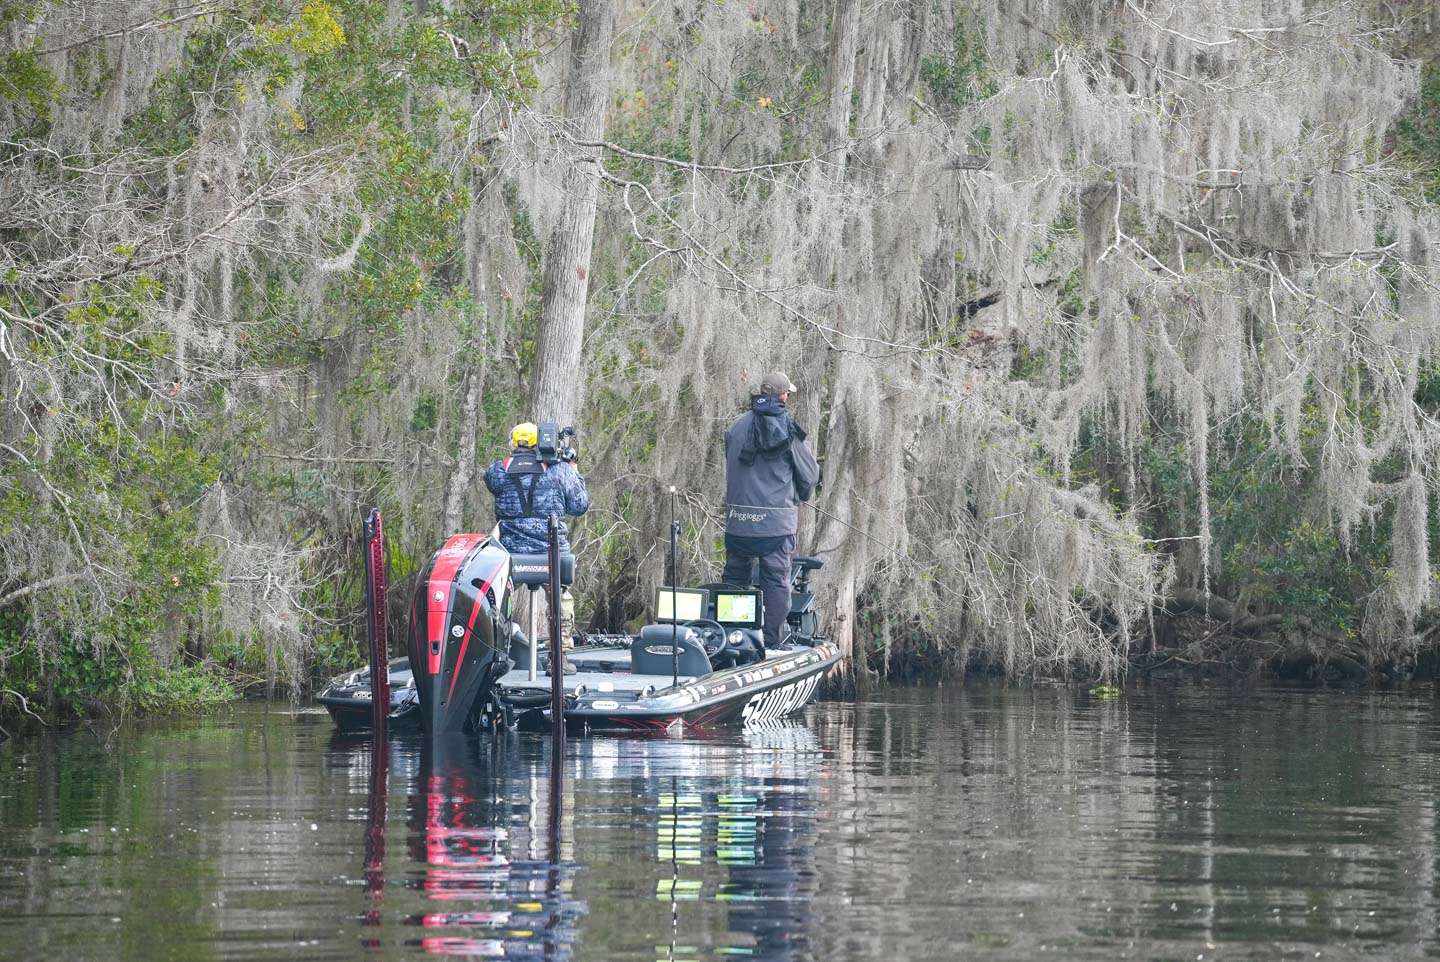 Over the course of the first two days of competition, David Mullins brought in a combined 33 pounds, 12 ounces which had him sitting in sixth place coming into Day 3. Mullins made an early run to Dunns Creek. 